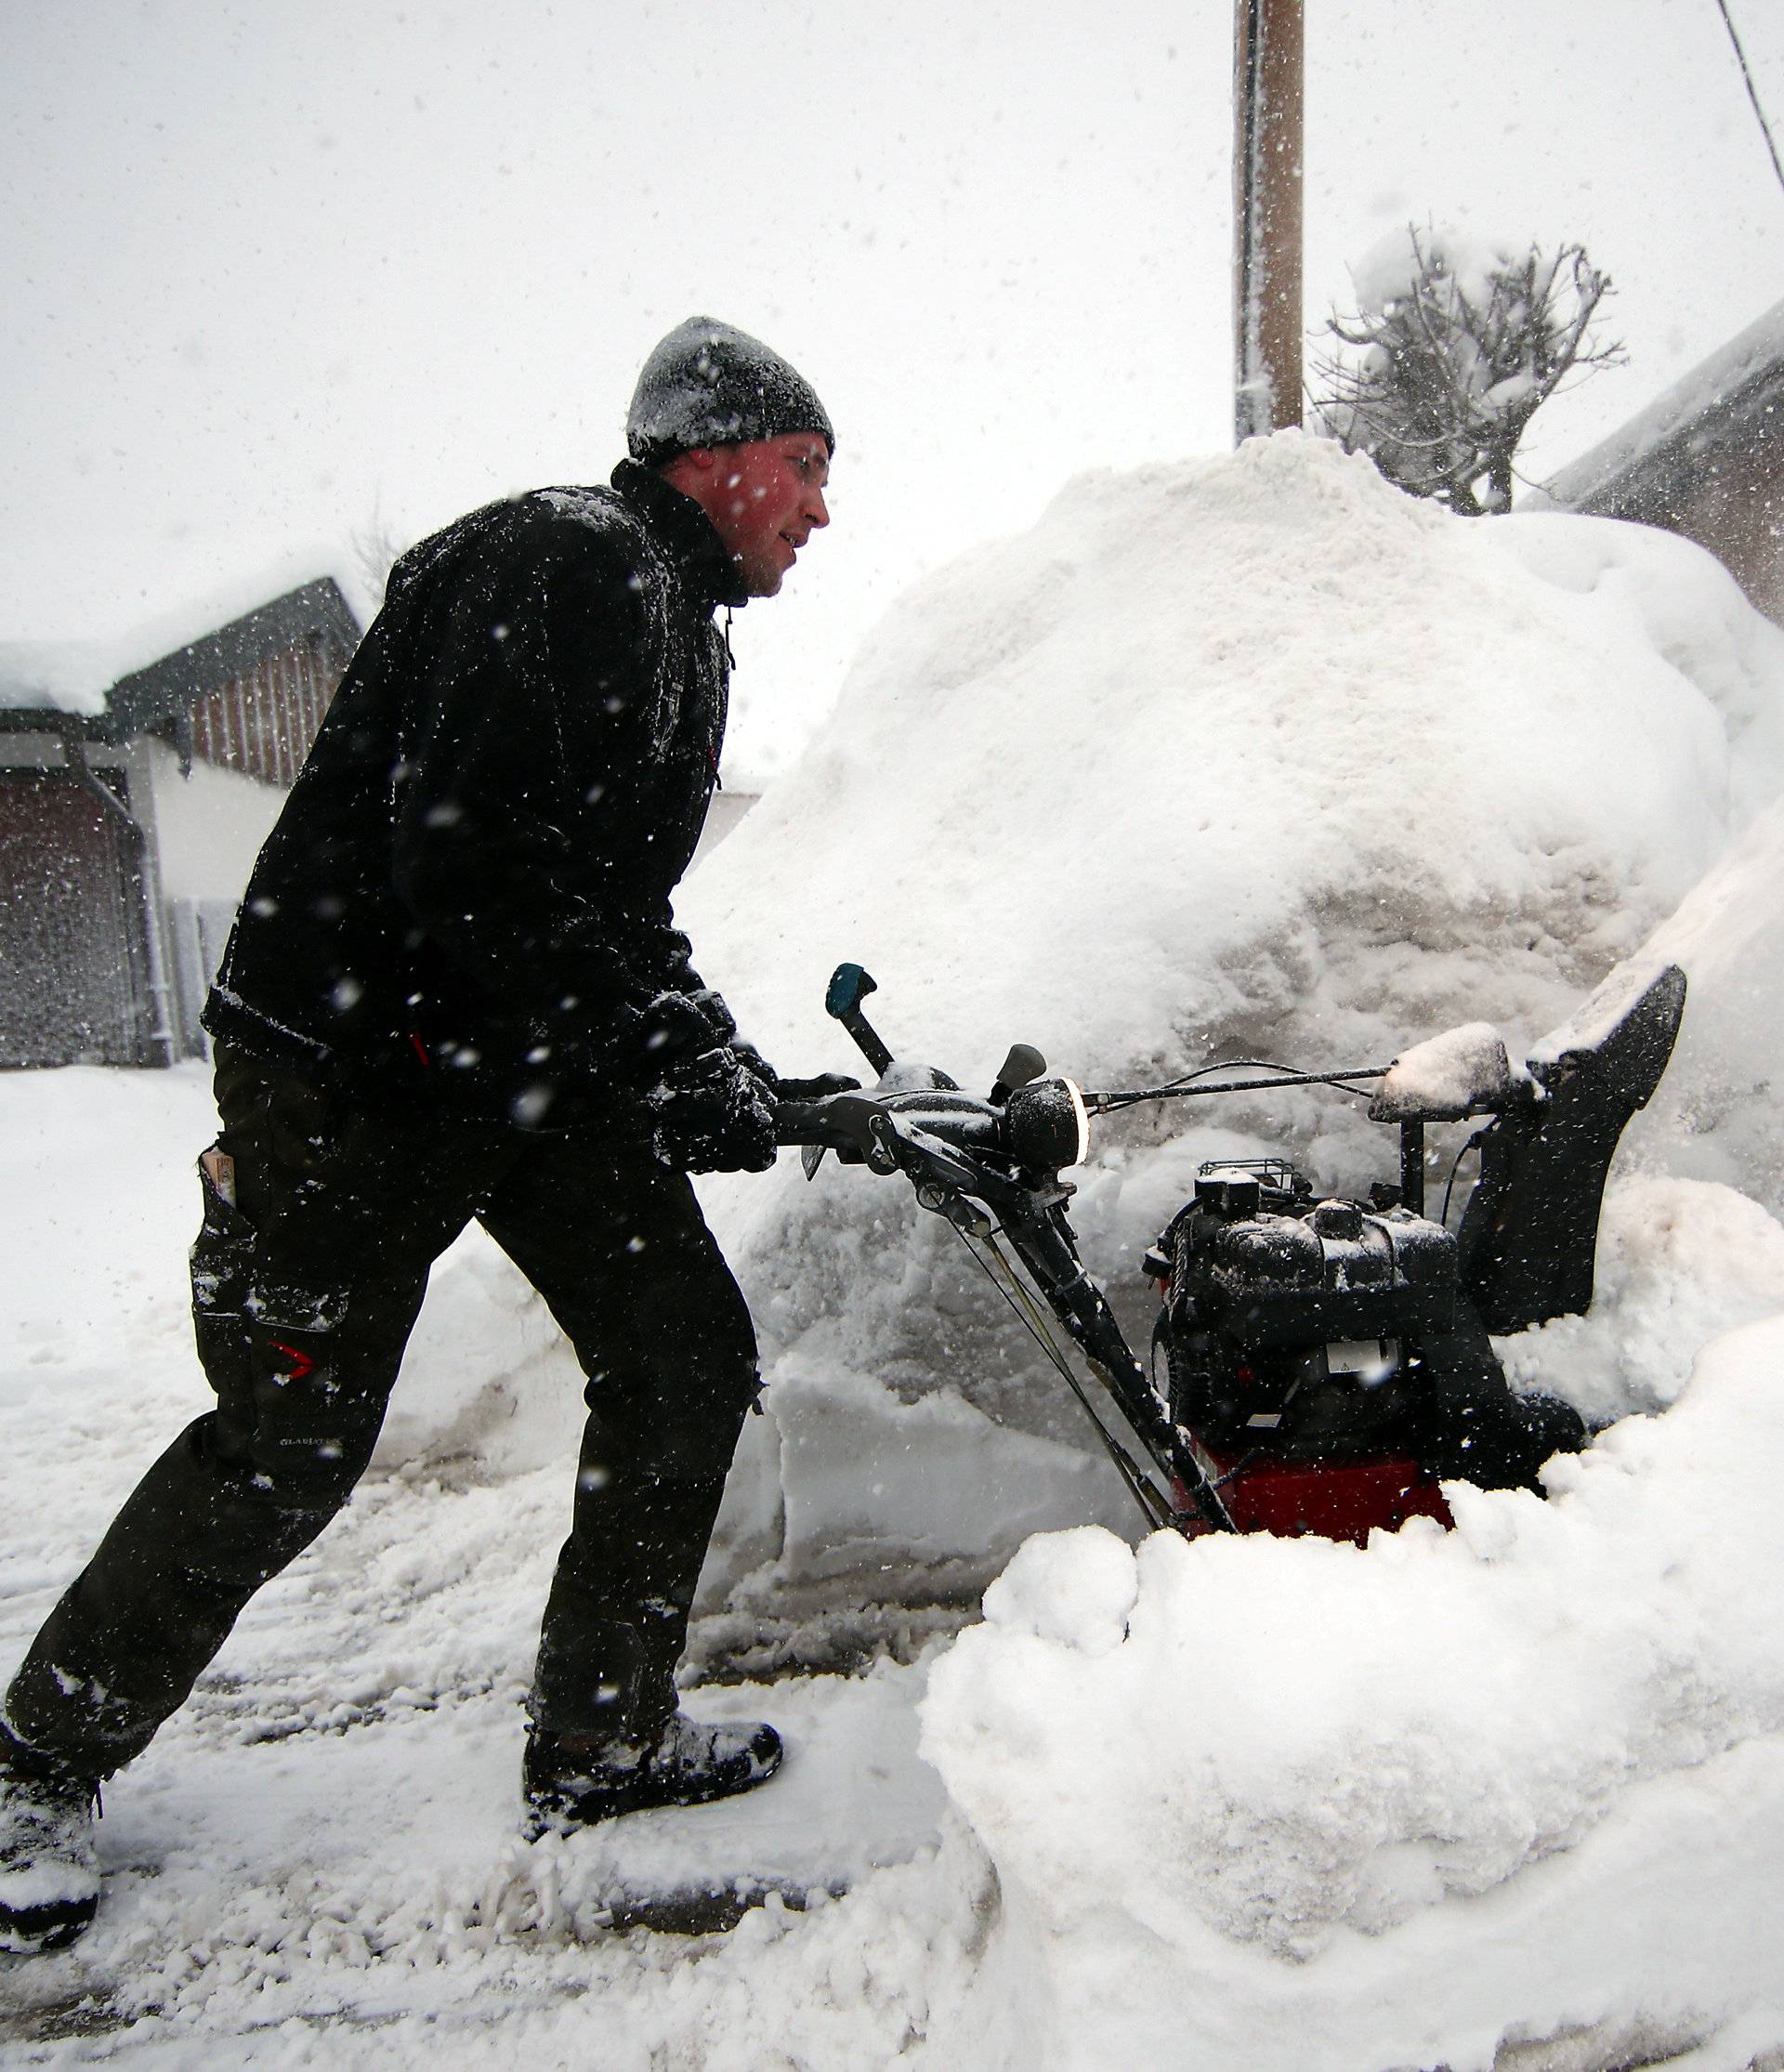 A man uses a snow blower after heavy snowfalls in Schaftlach